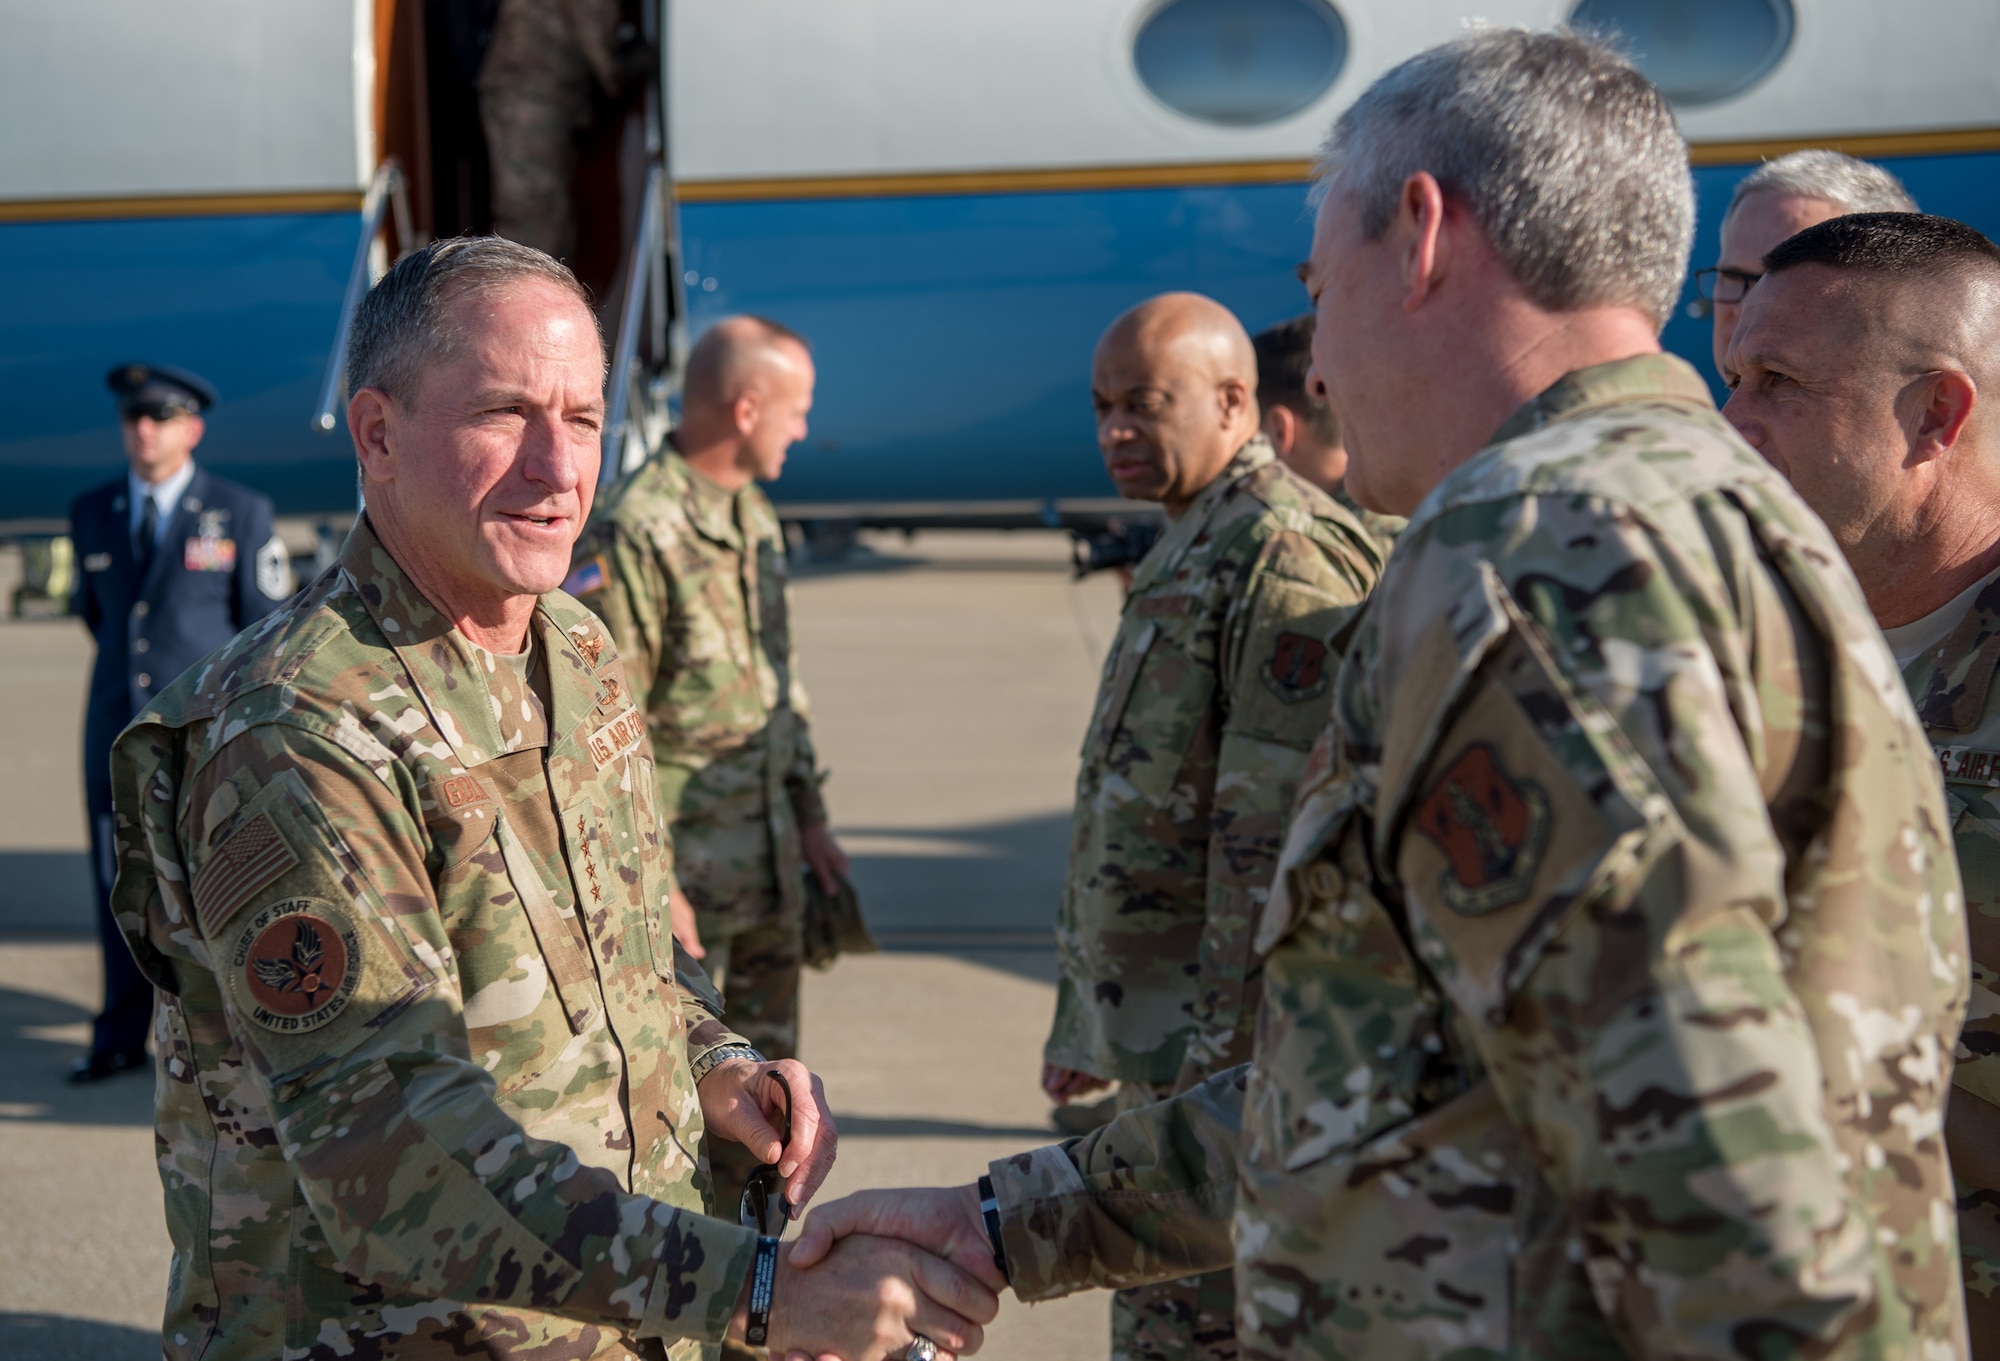 Air Force Chief of Staff Gen. David L. Goldfein (left) greets Chief Master Sgt. Shane Lagrone, 123rd Airlift Wing command chief, upon arrival at the Kentucky Air National Guard Base in Louisville, Ky., Aug. 10, 2019. Goldfein toured various work centers, learning about the unique mission sets of the 123rd Airlift Wing. (U.S. Air National Guard photo by Staff Sgt. Joshua Horton)